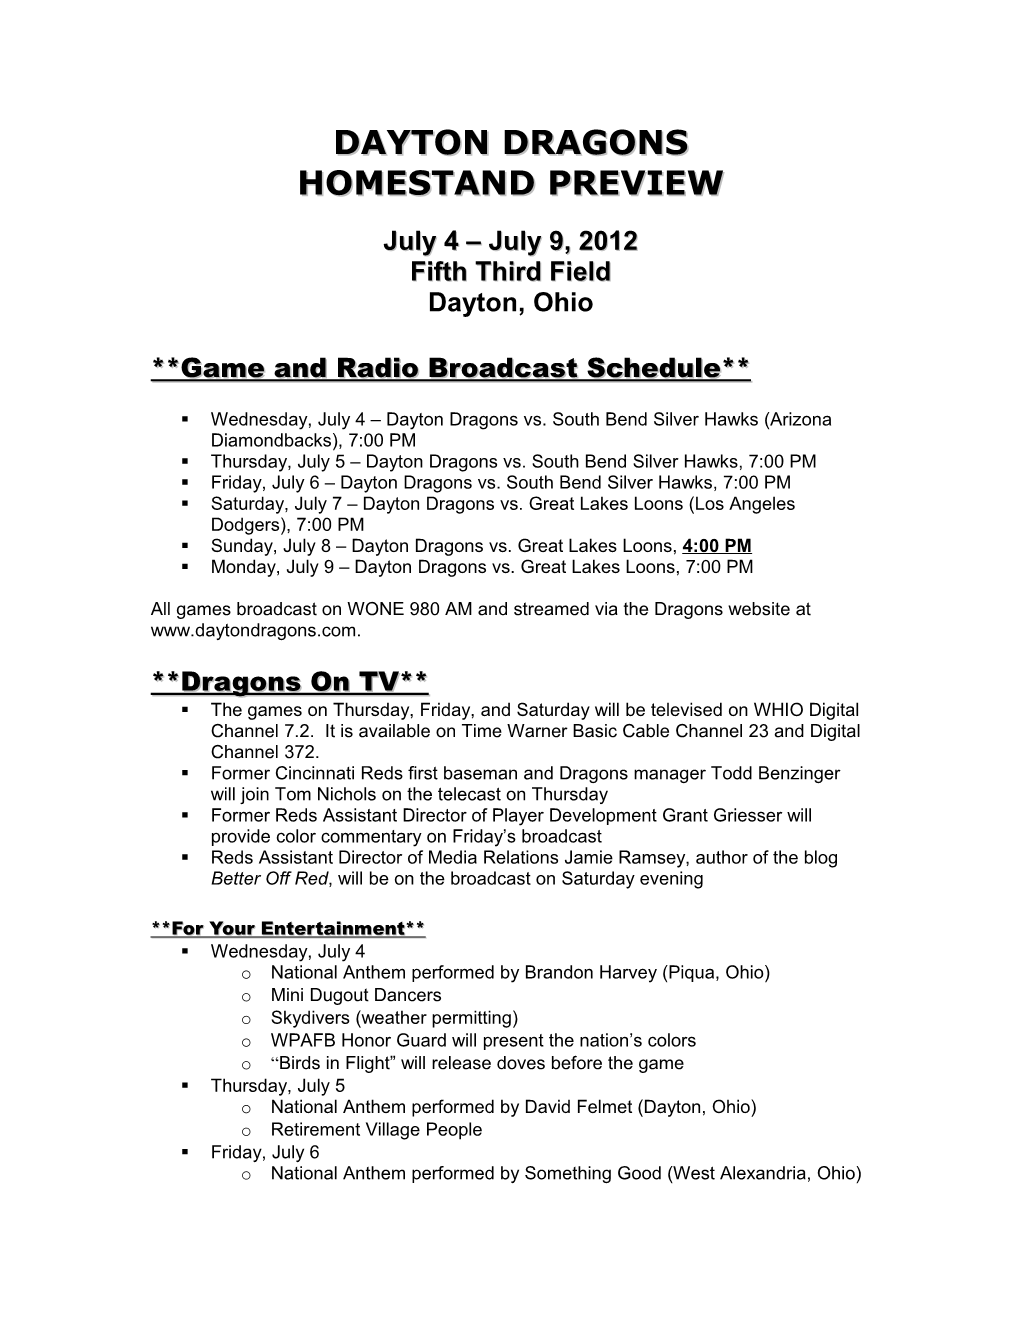 Game and Radio Broadcast Schedule